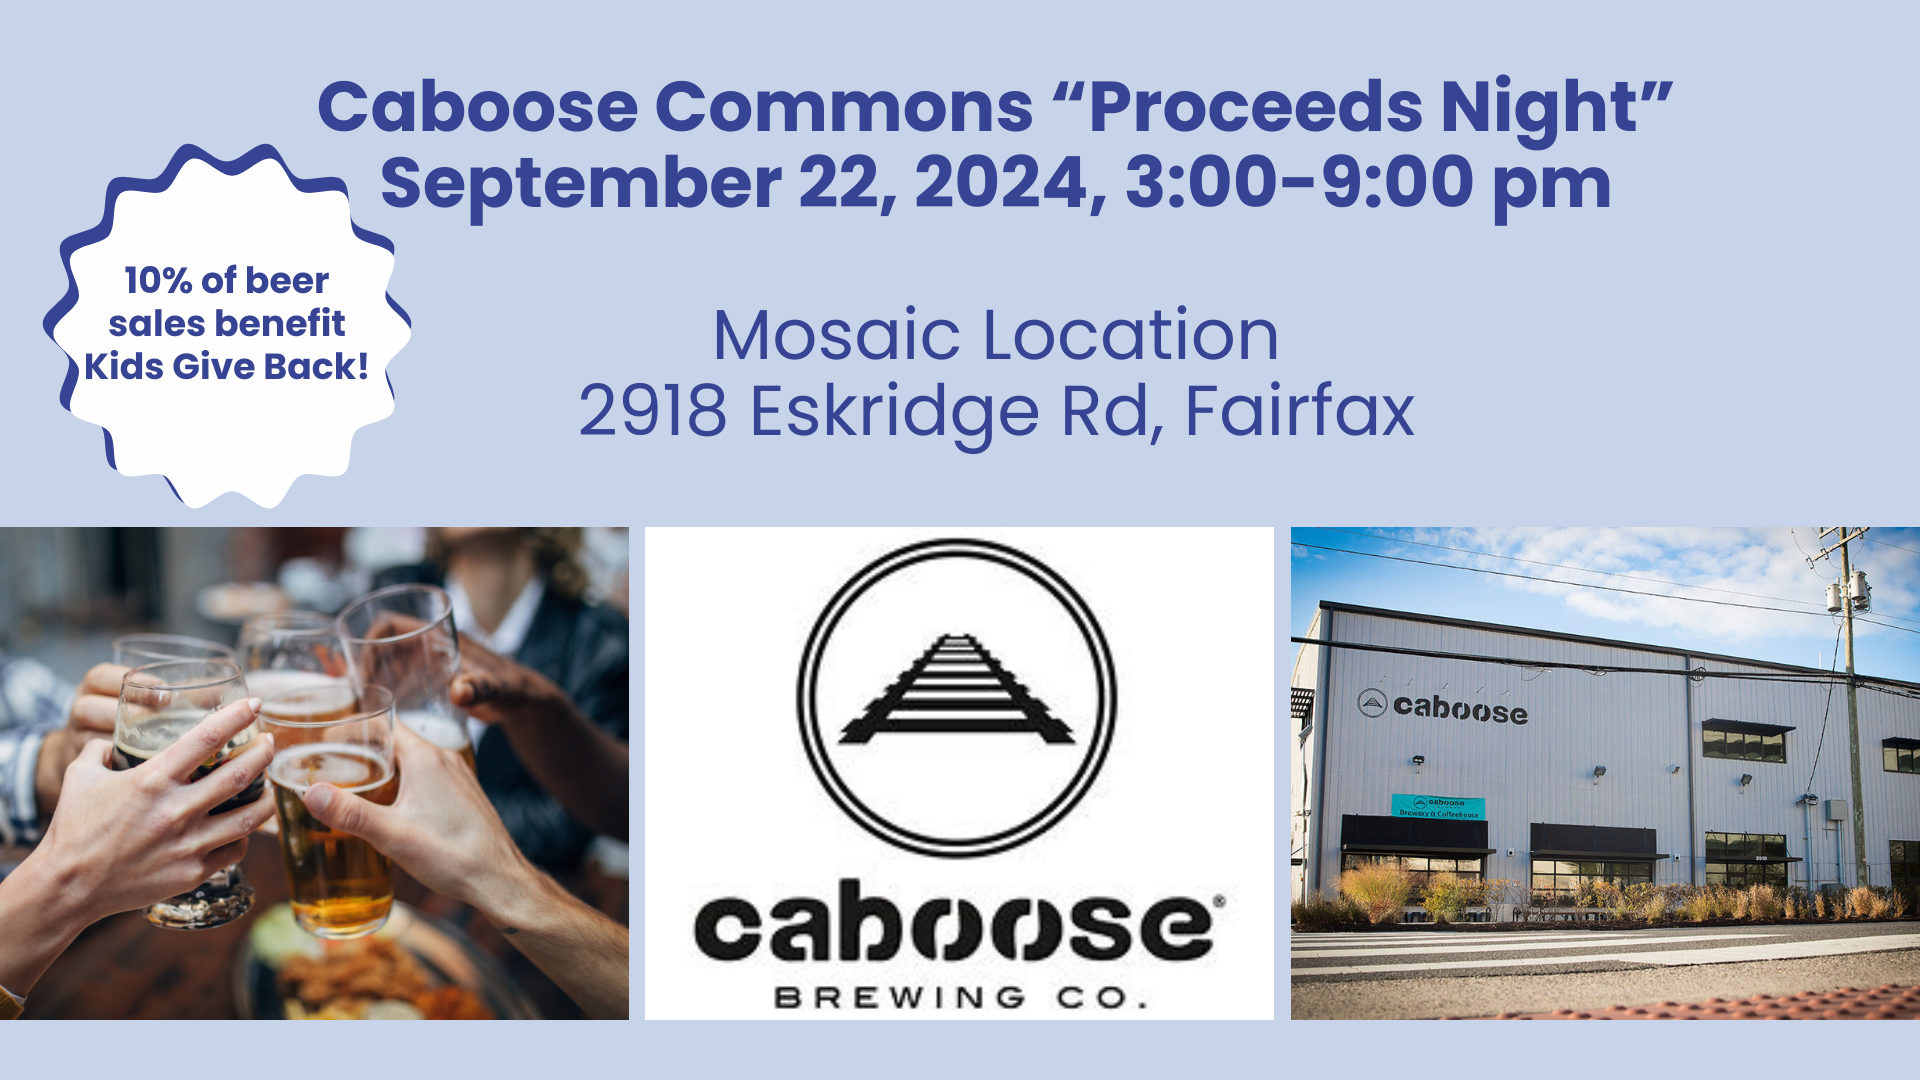 Caboose Commons Proceeds Night, Sept. 22